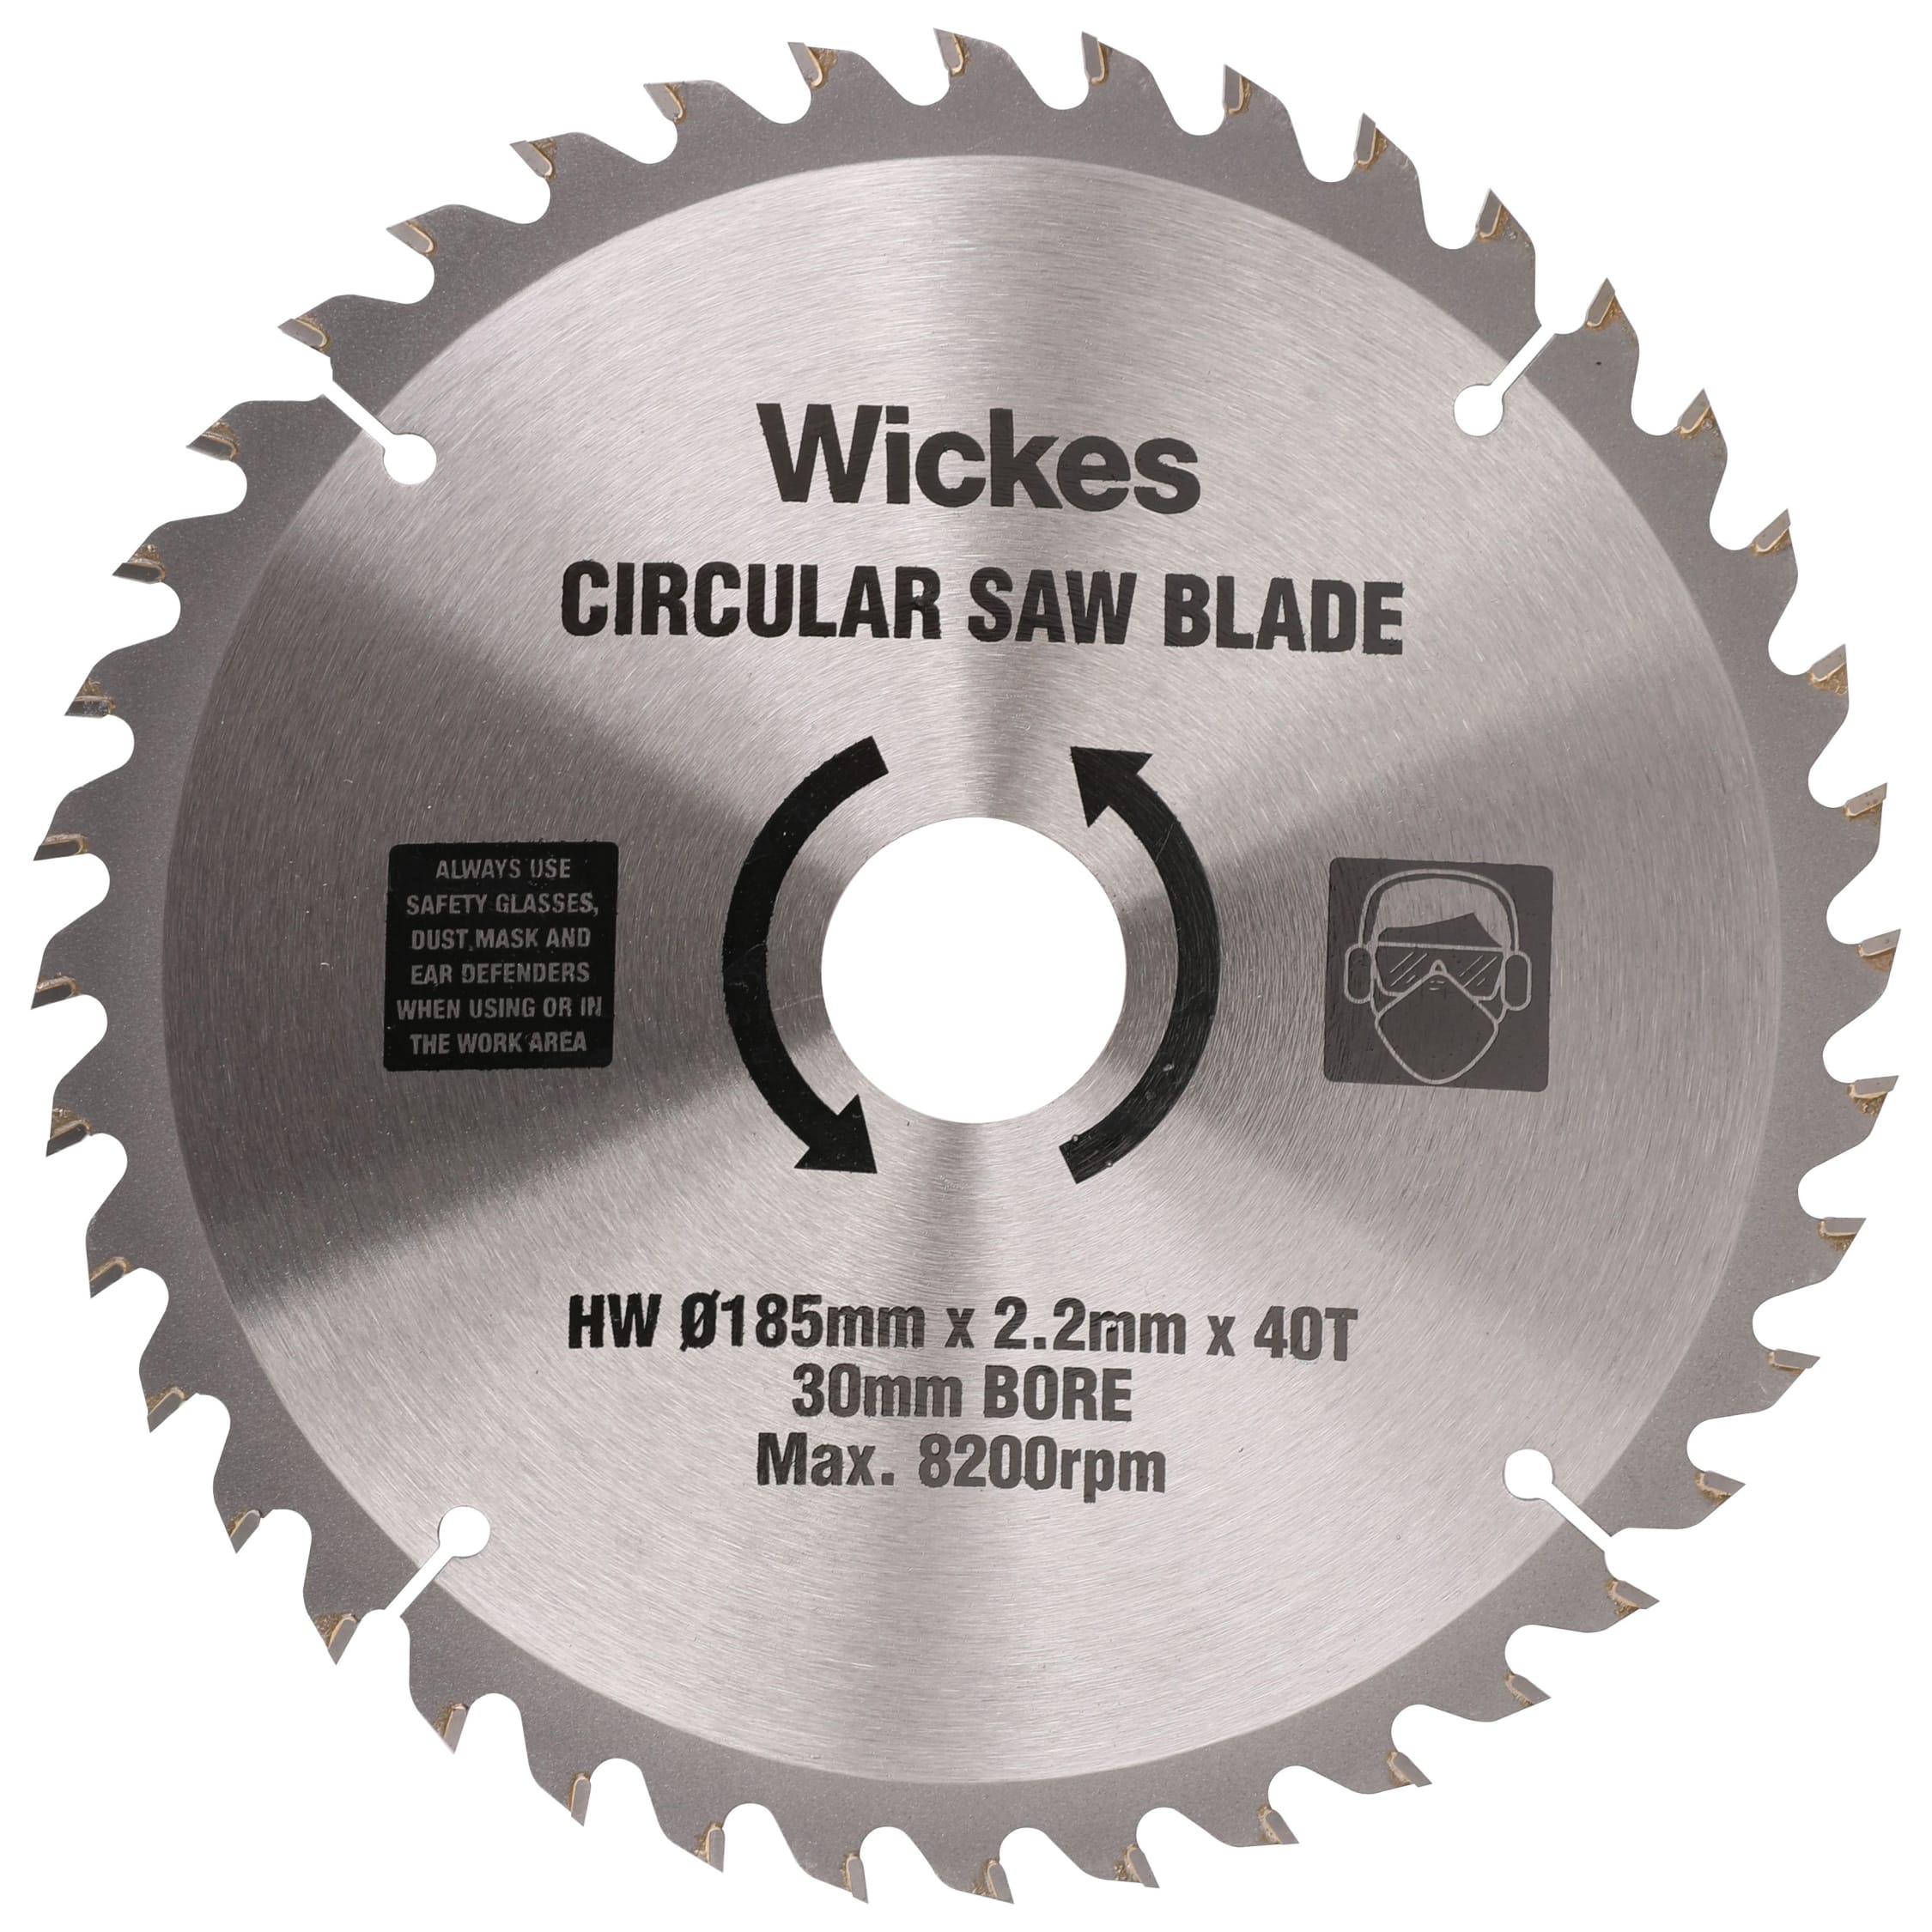 TCT 24T 4-1/2 4.5 inch Carbide Circular Saw Blade for Rockwell Rk3441k ,  Worx WX429L Compact Saw 9.5mm/ 3/8 arbor wood, plastic and composite  materials 